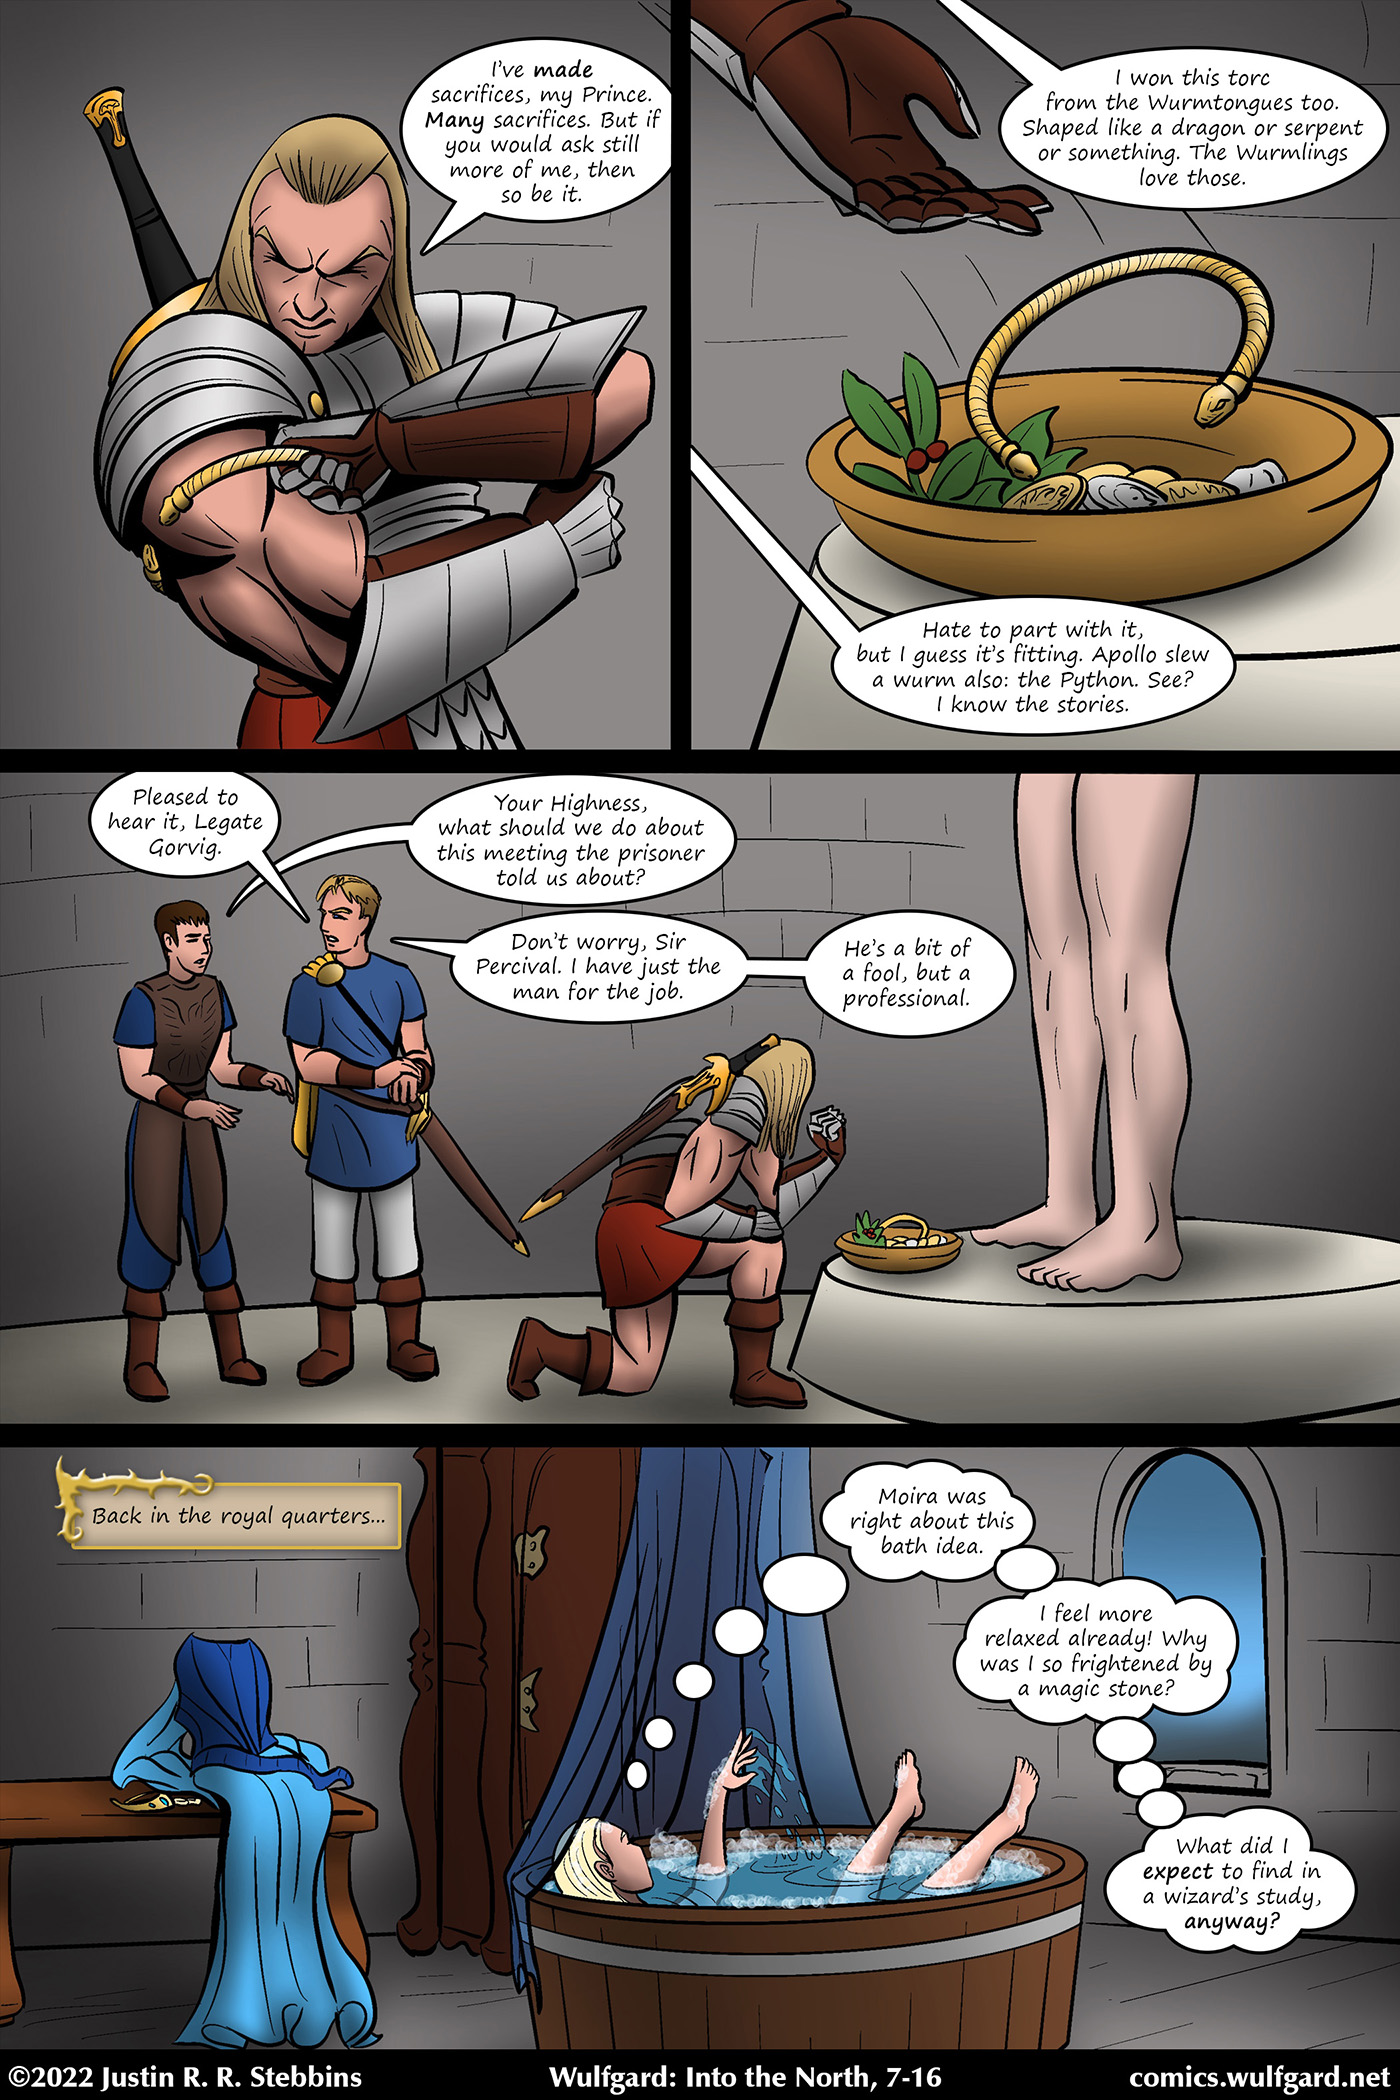 Wulfgard: Into the North, Chapter 7 Page 16